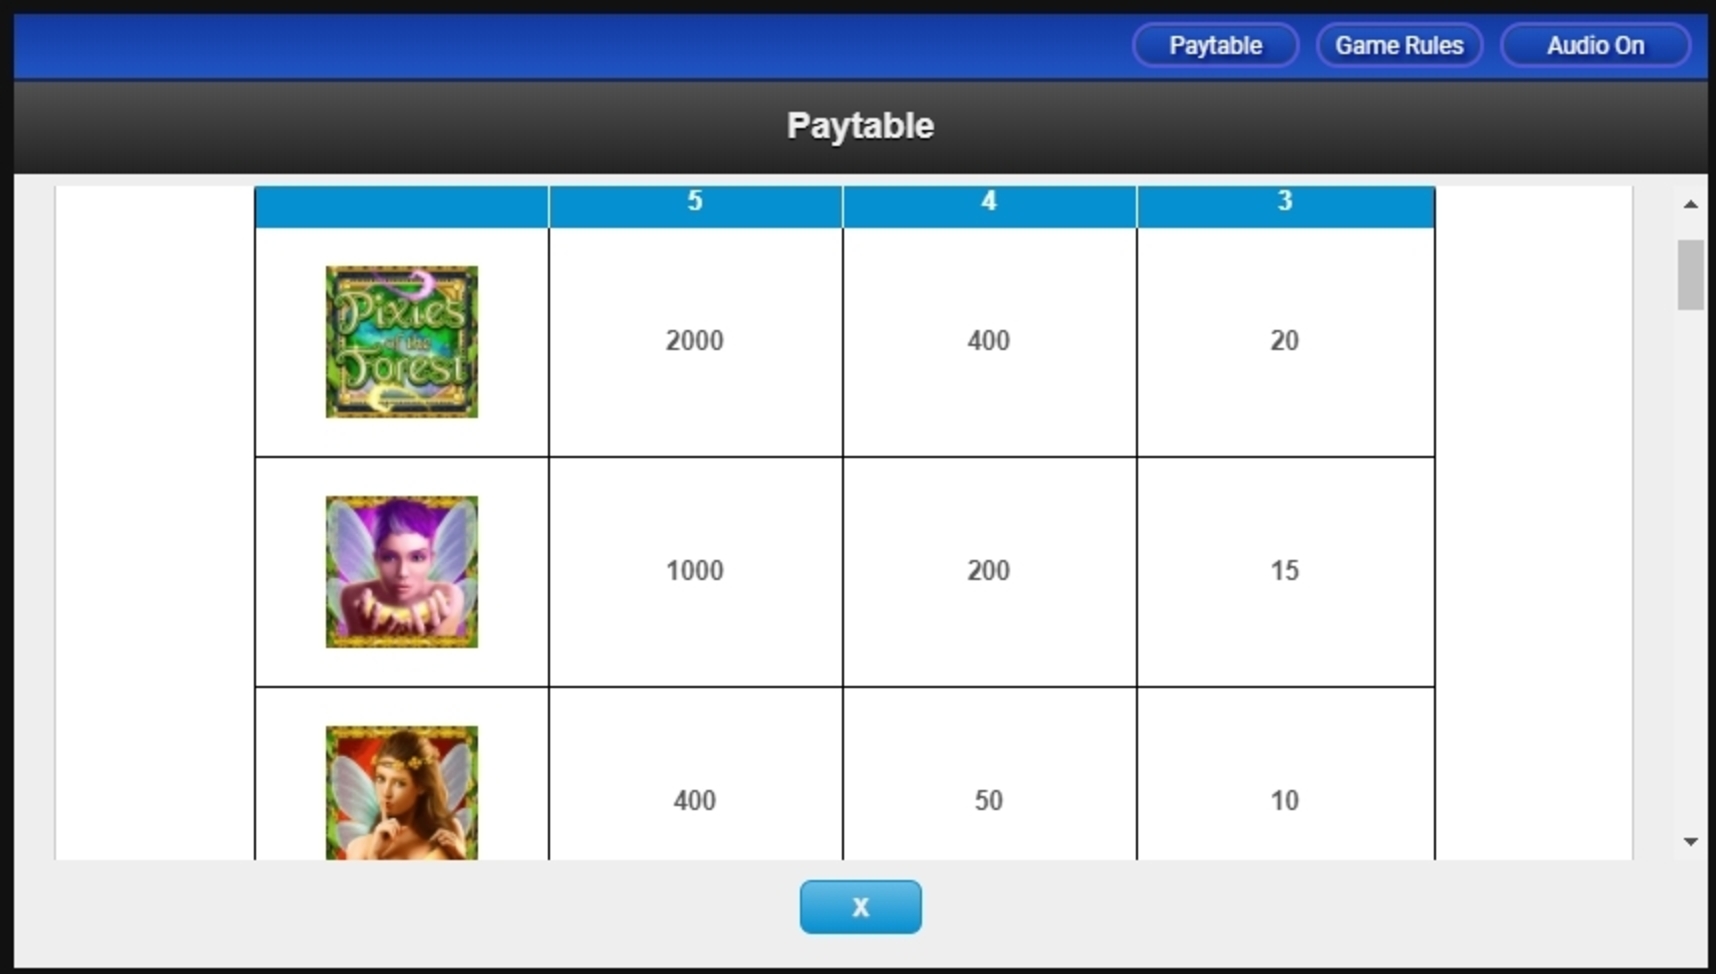 Info of Pixies of the Forest Slot Game by IGT